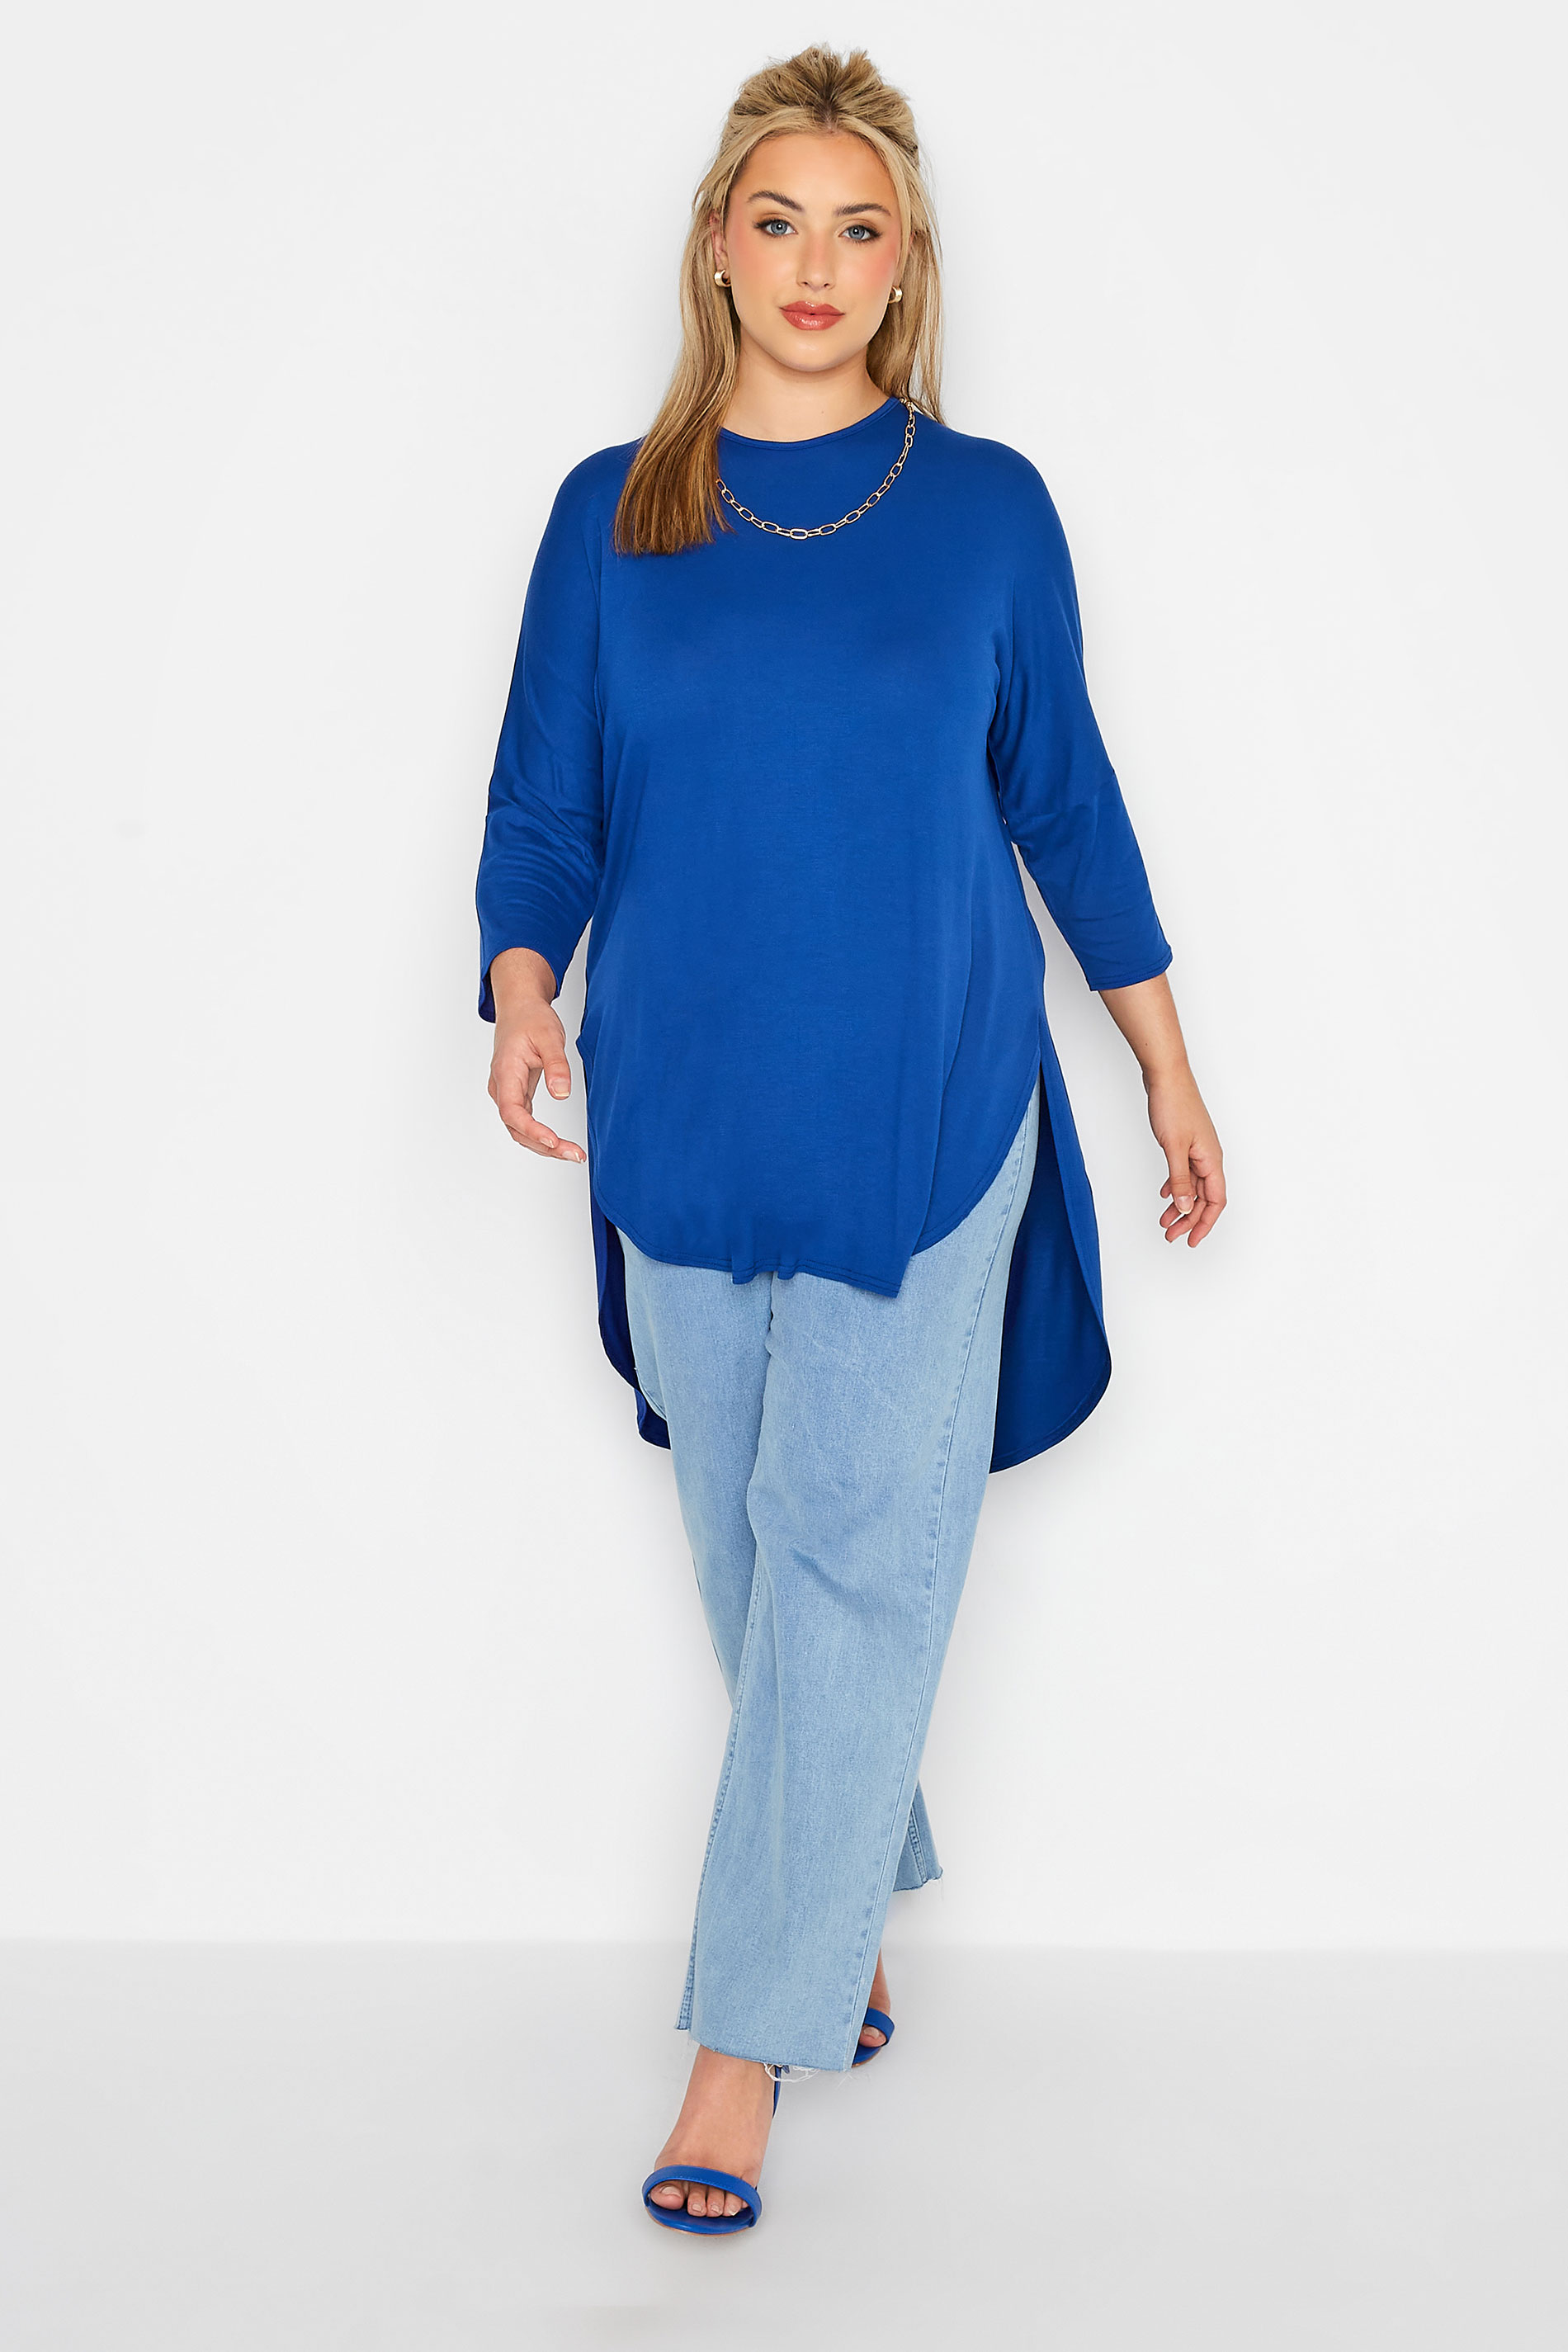 Grande taille  Tops Grande taille  Tops Ourlet Plongeant | LIMITED COLLECTION - T-Shirt Bleu Roi Manches Longues Ourlet Plongeant - EC12679